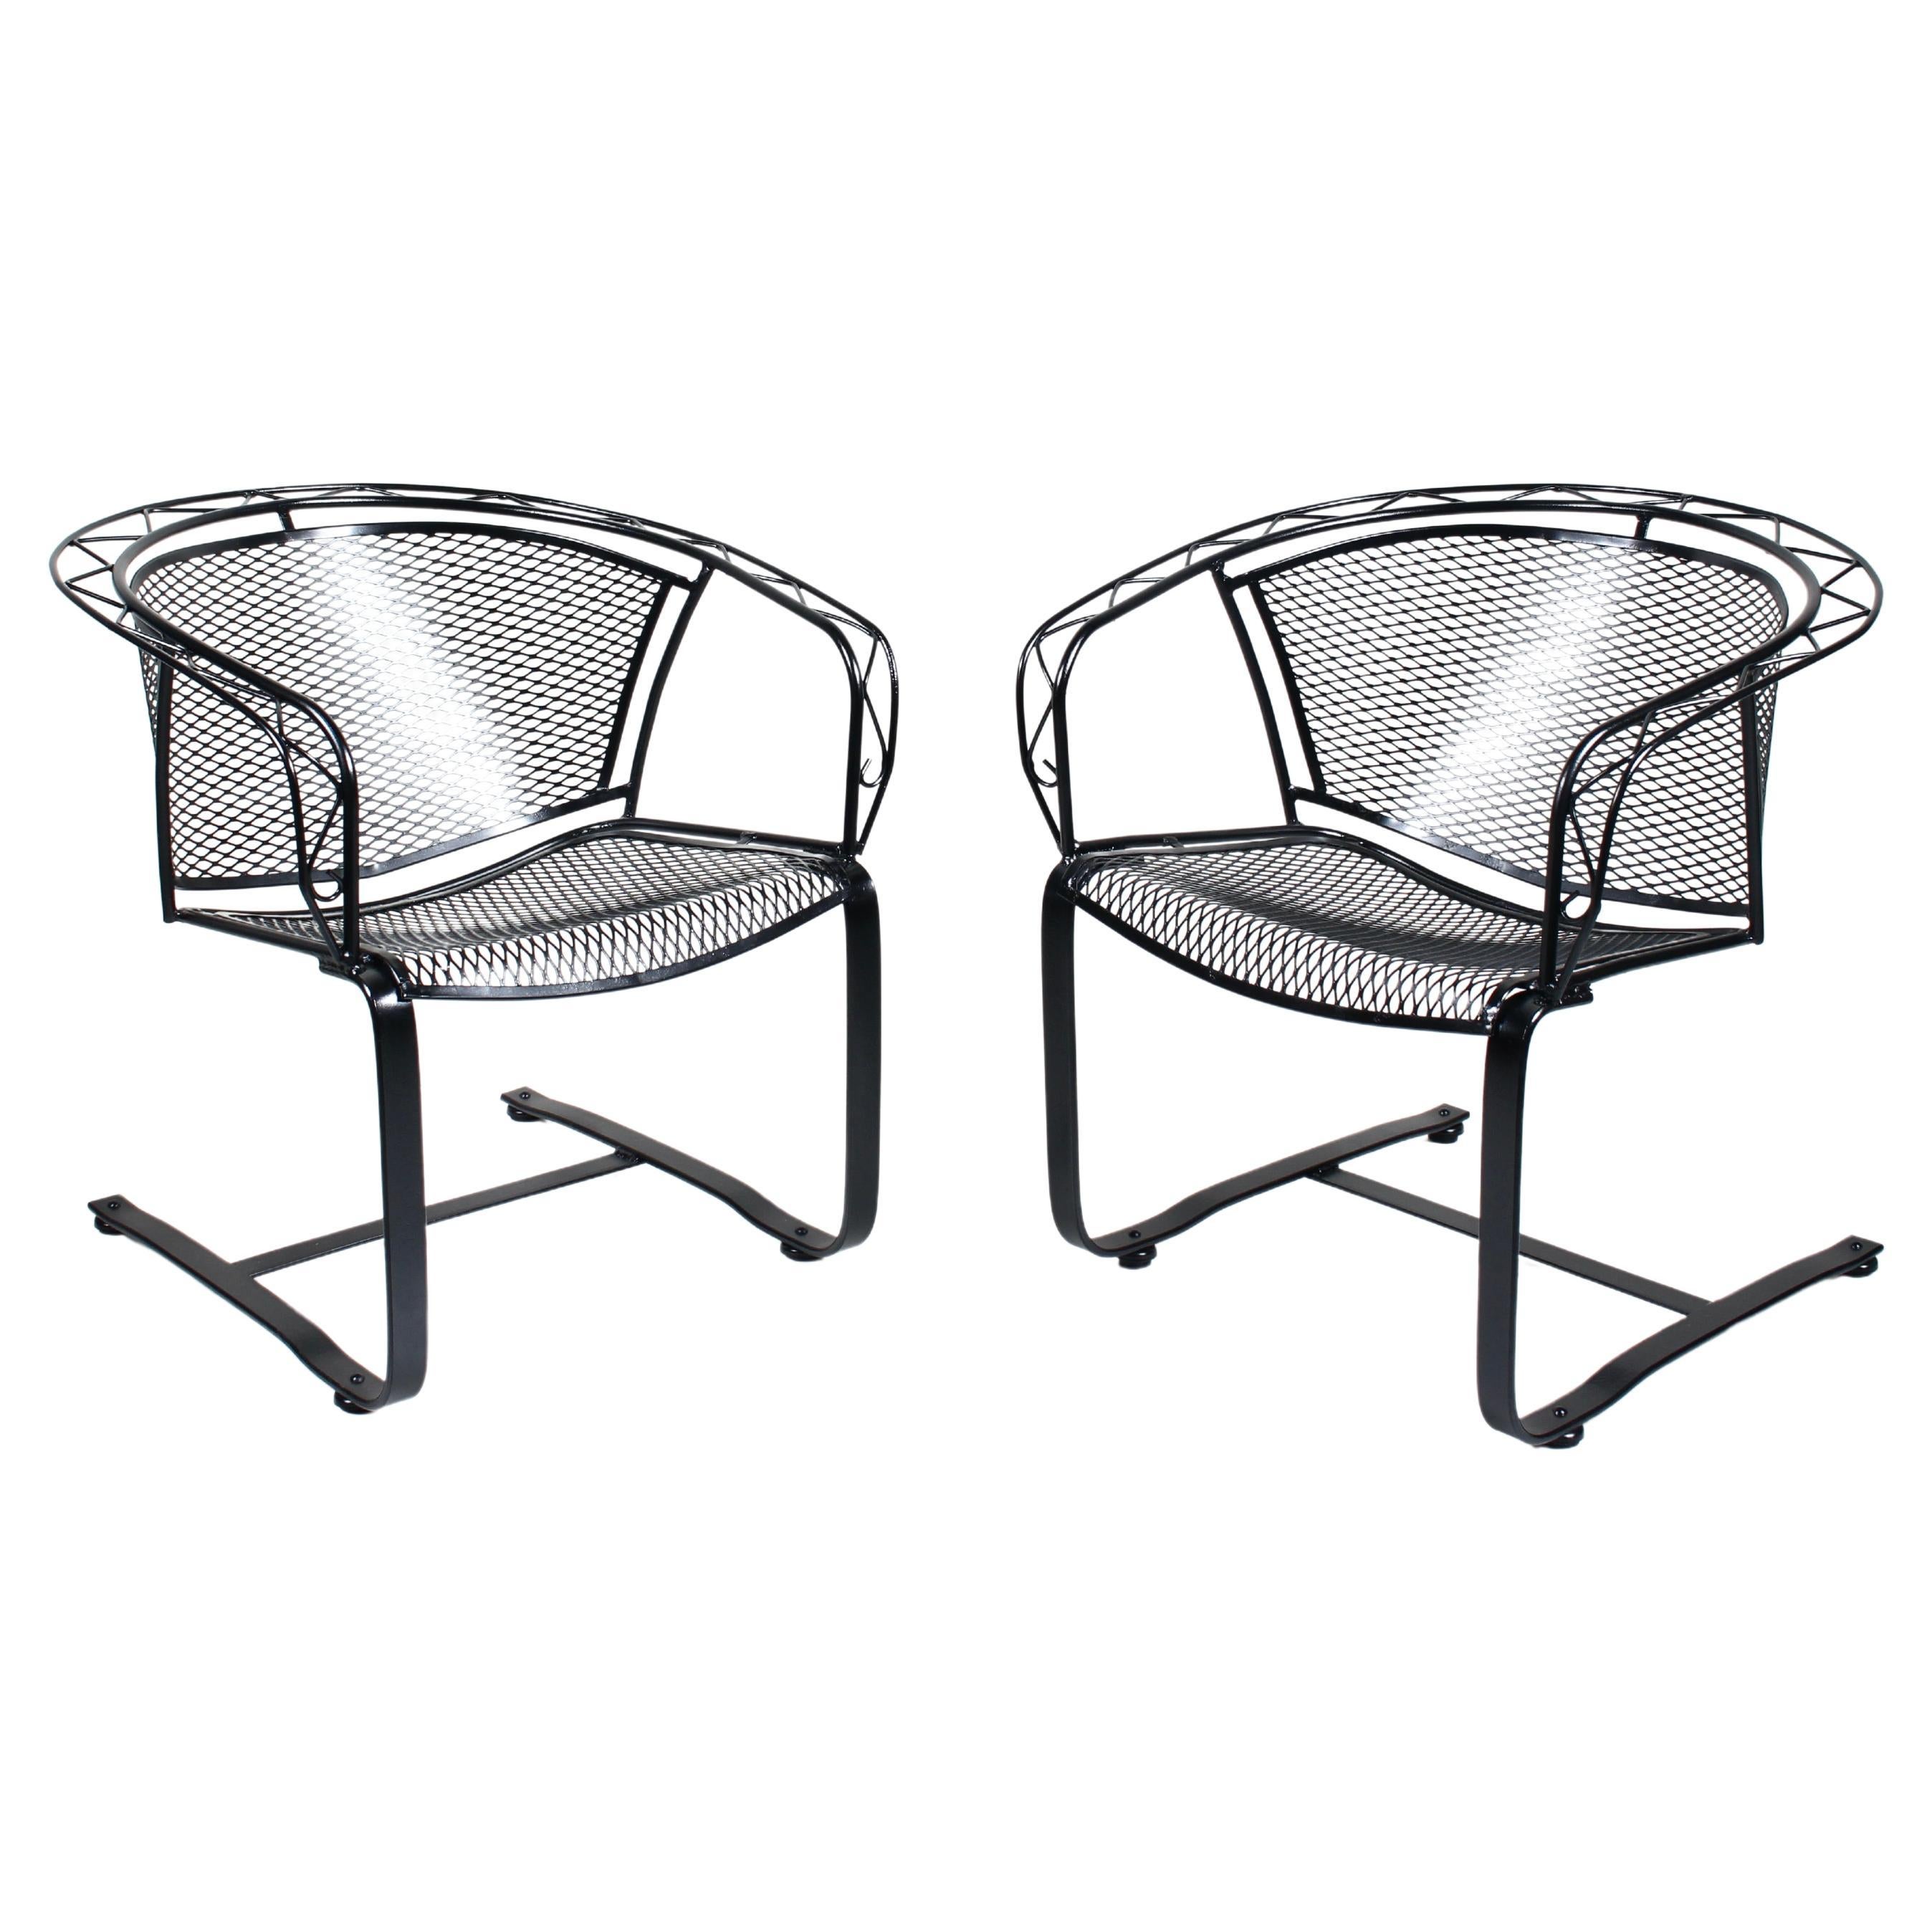 Pair of Russell Woodard Black Satin Spring Rocker Lounge Chairs, 1950s For Sale